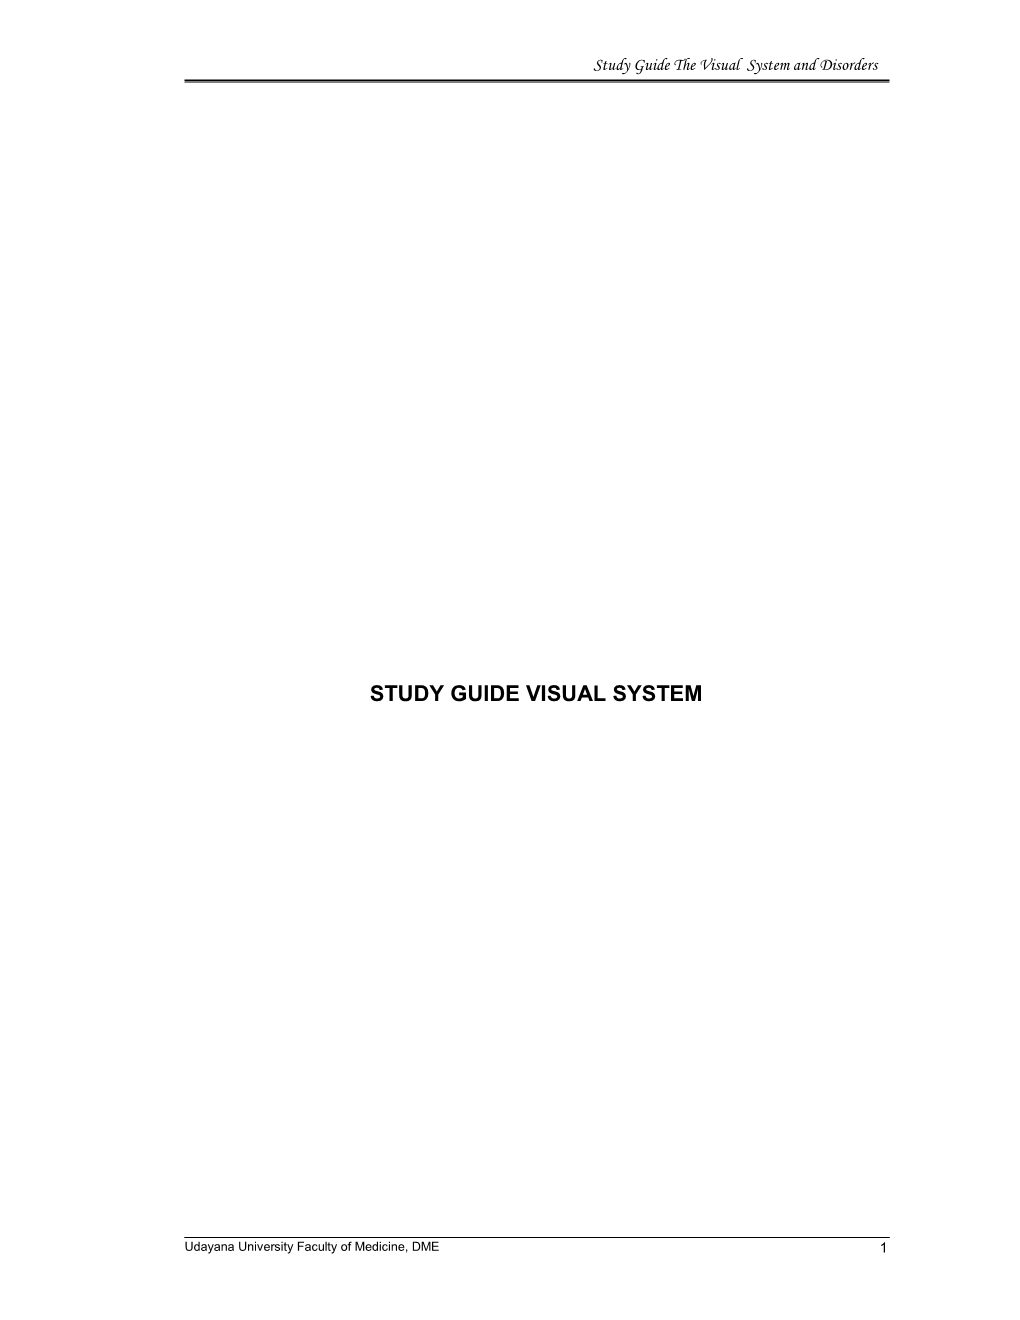 Study Guide Visual System